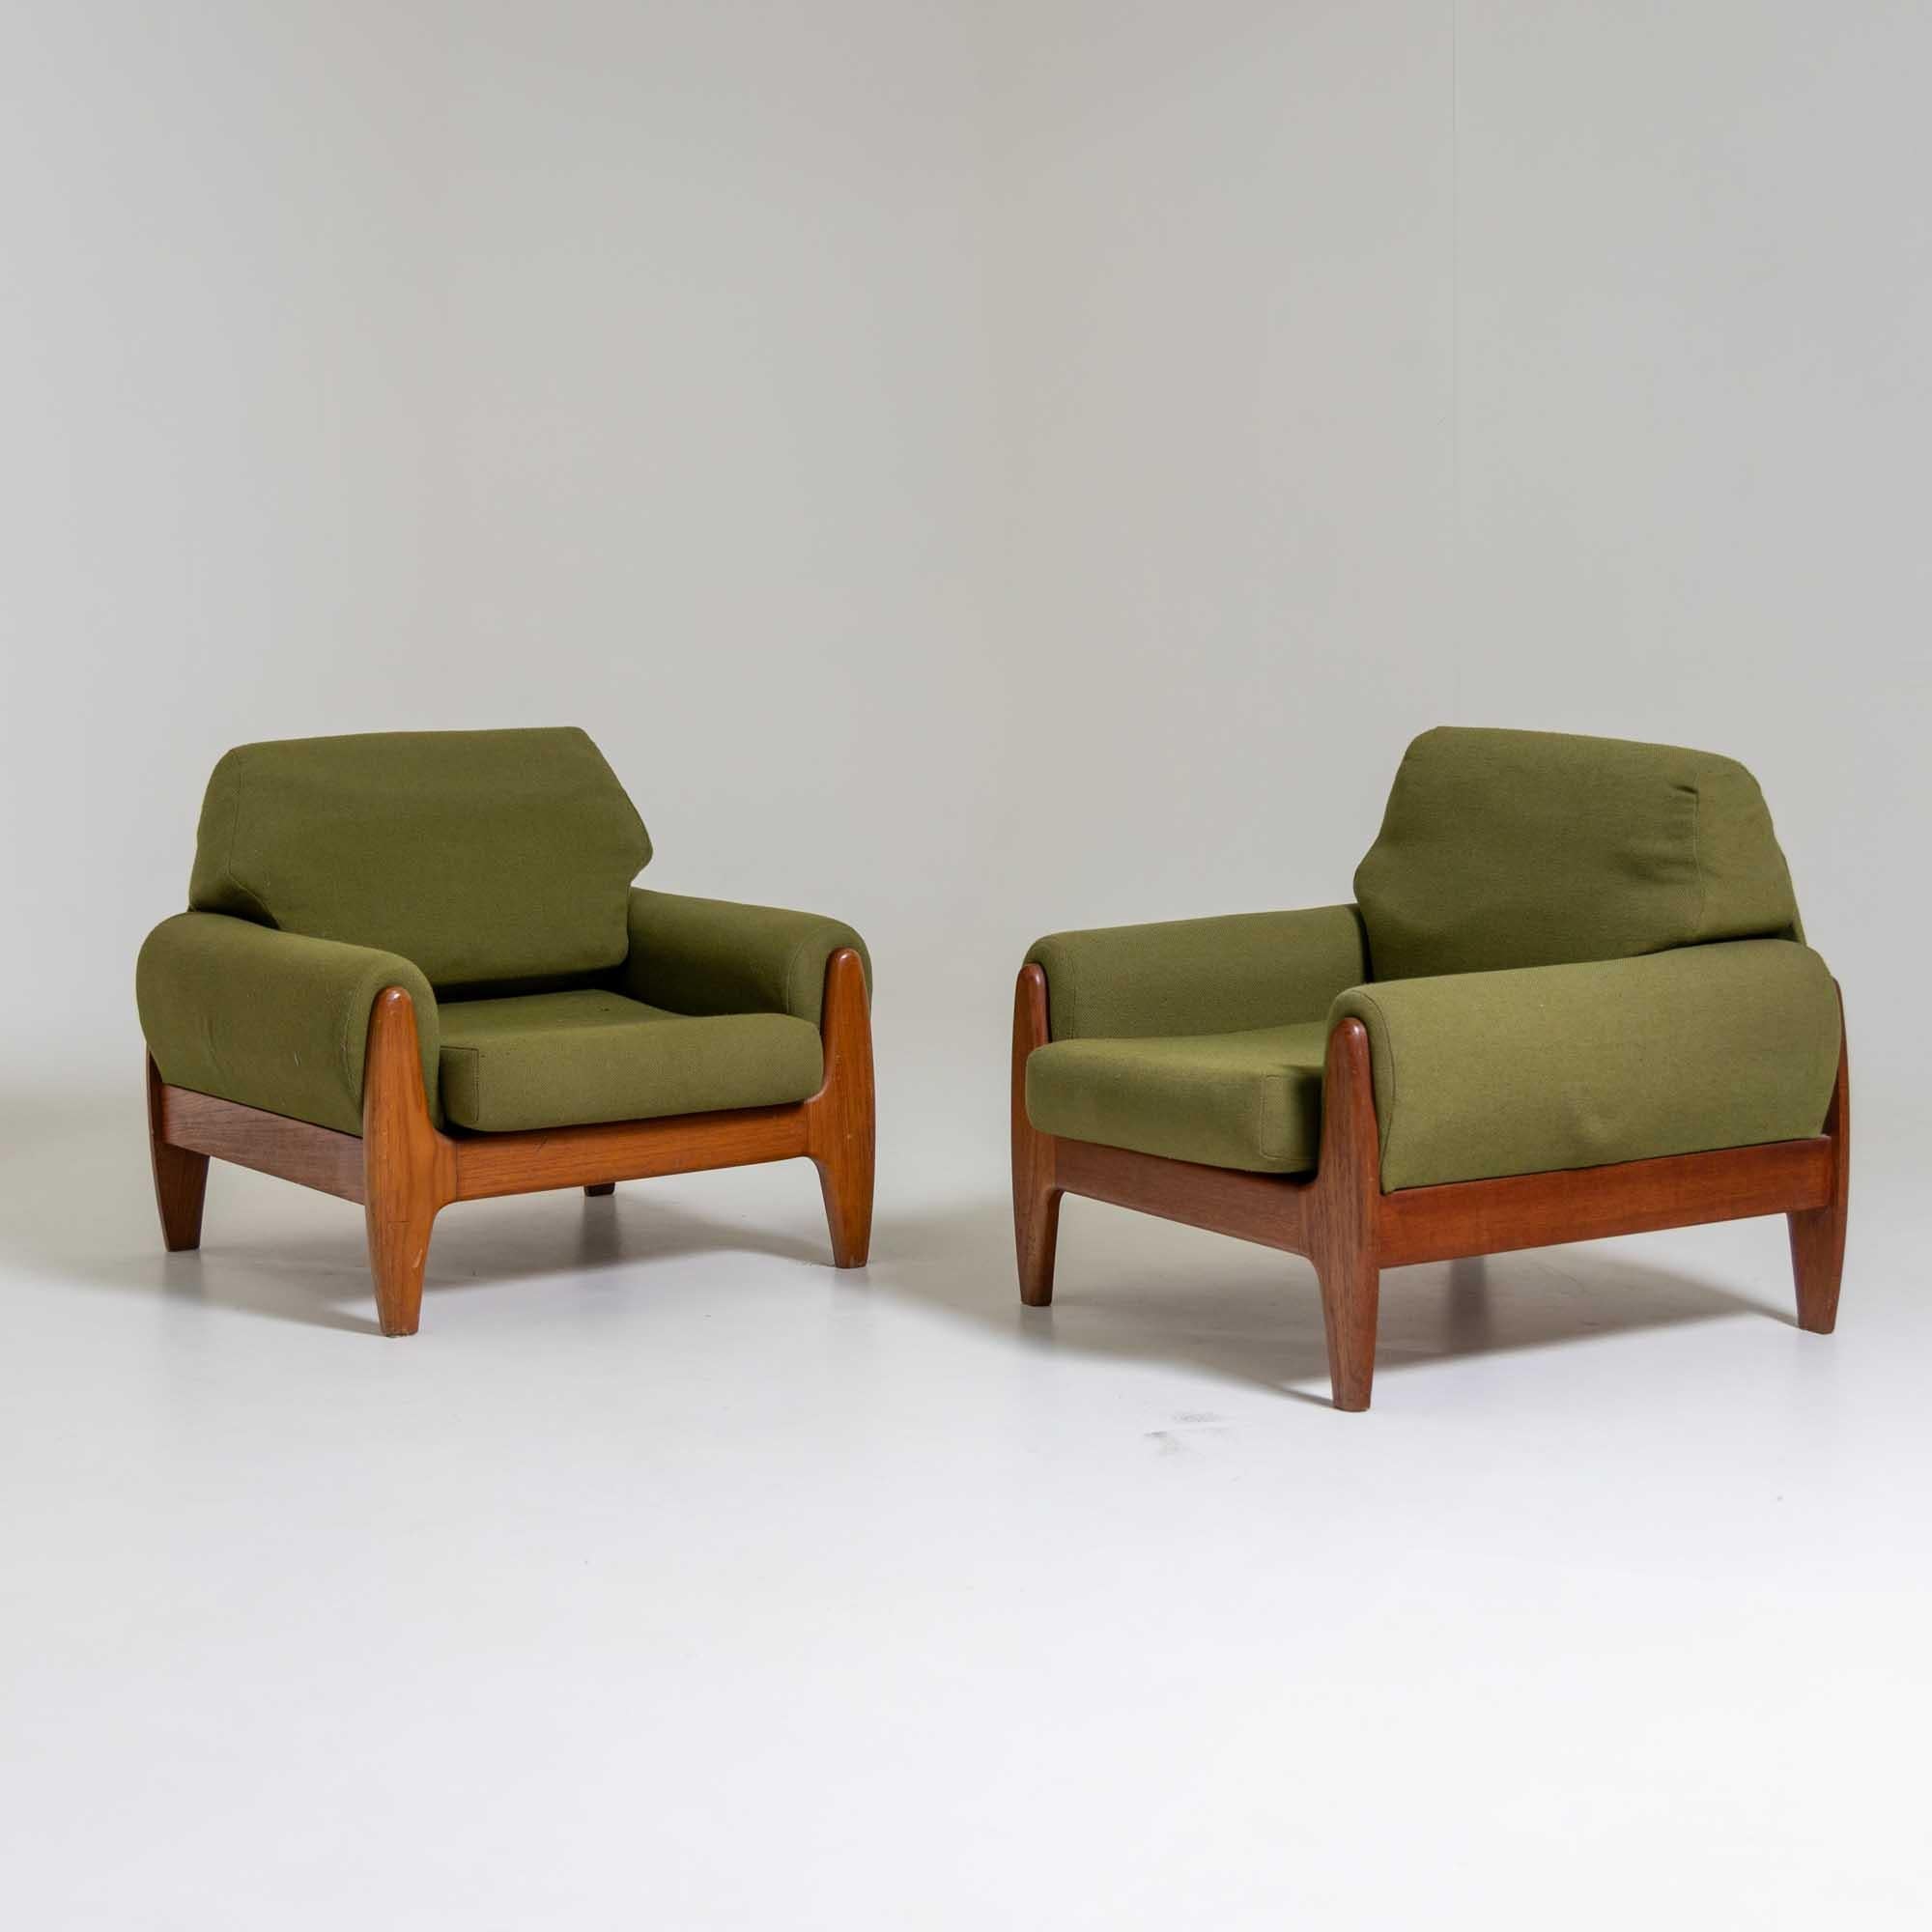 Danish Pair of Armchairs with Green Upholstery, by Illum Denmark, Mid-20th Century For Sale